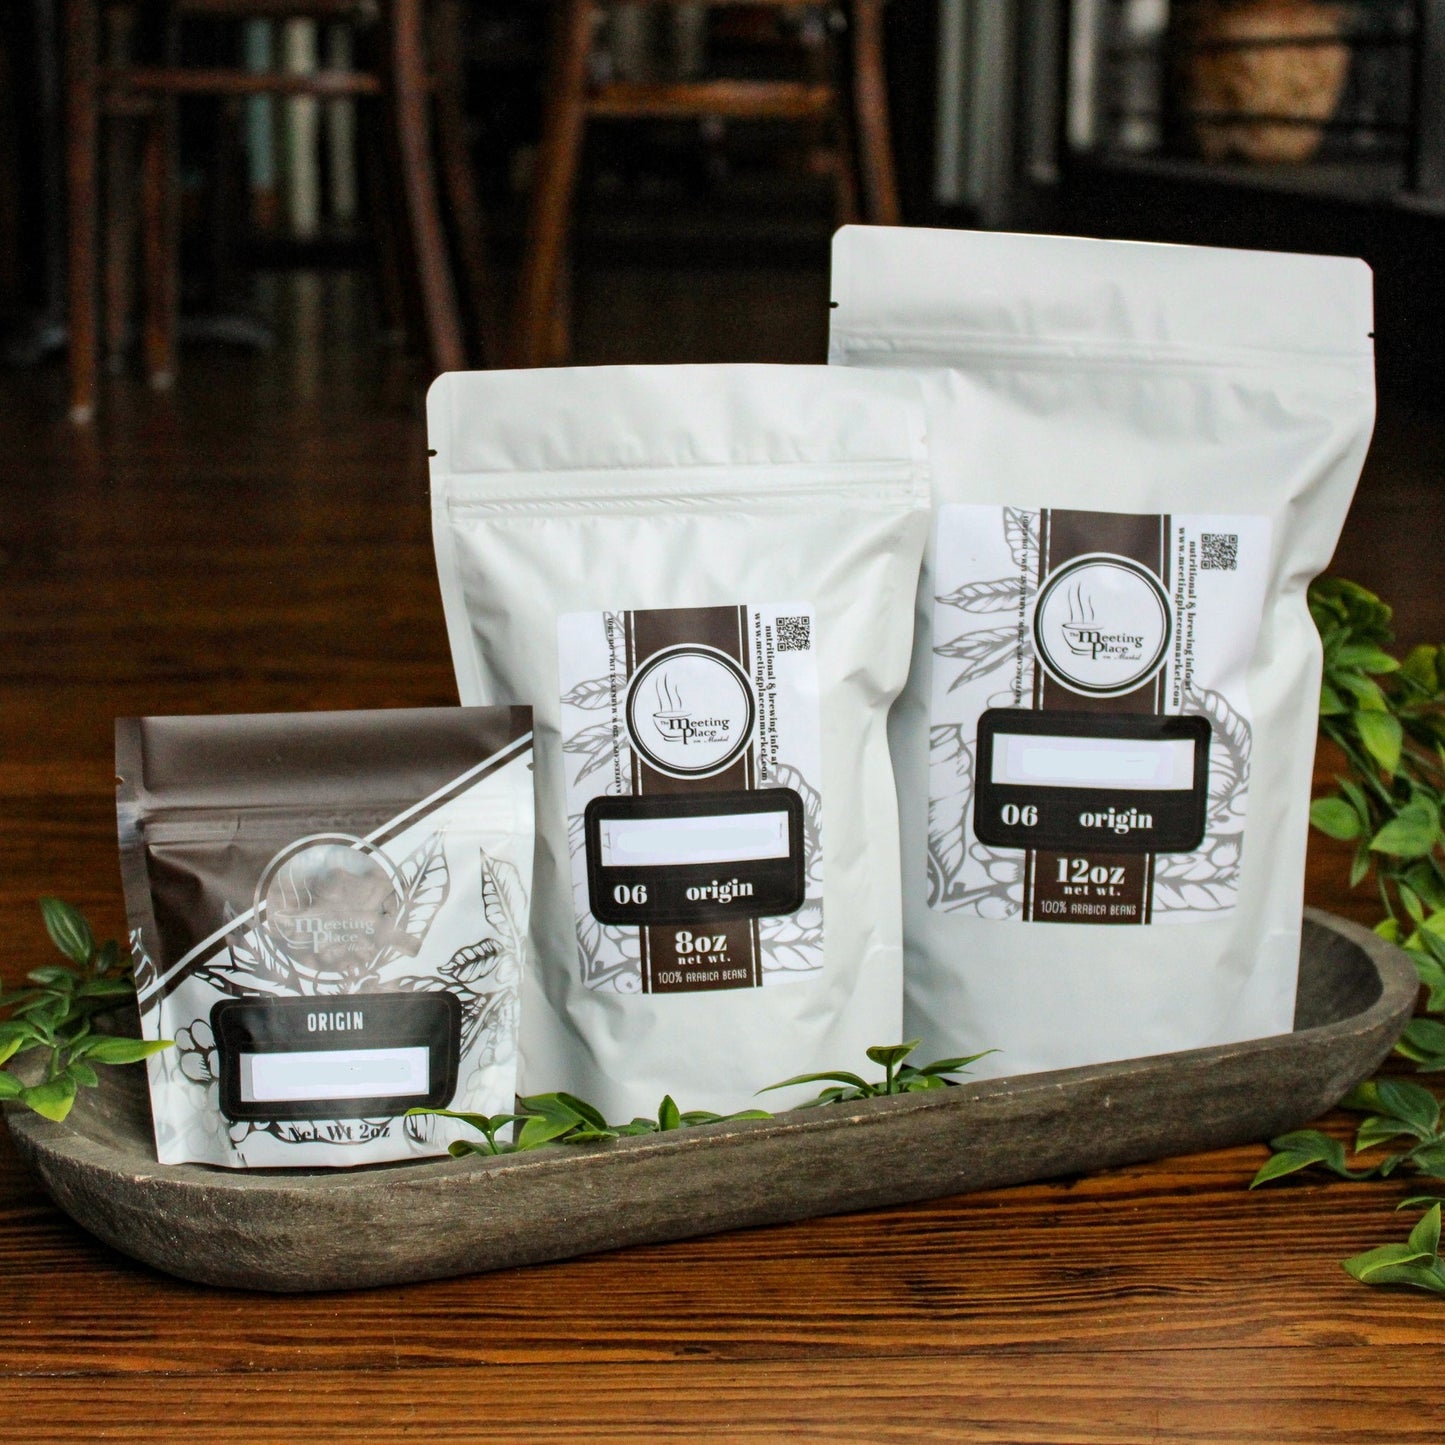 DECAF Colombian Coffee Beans / Ground Coffee Gourmet Coffee - The Meeting Place on Market